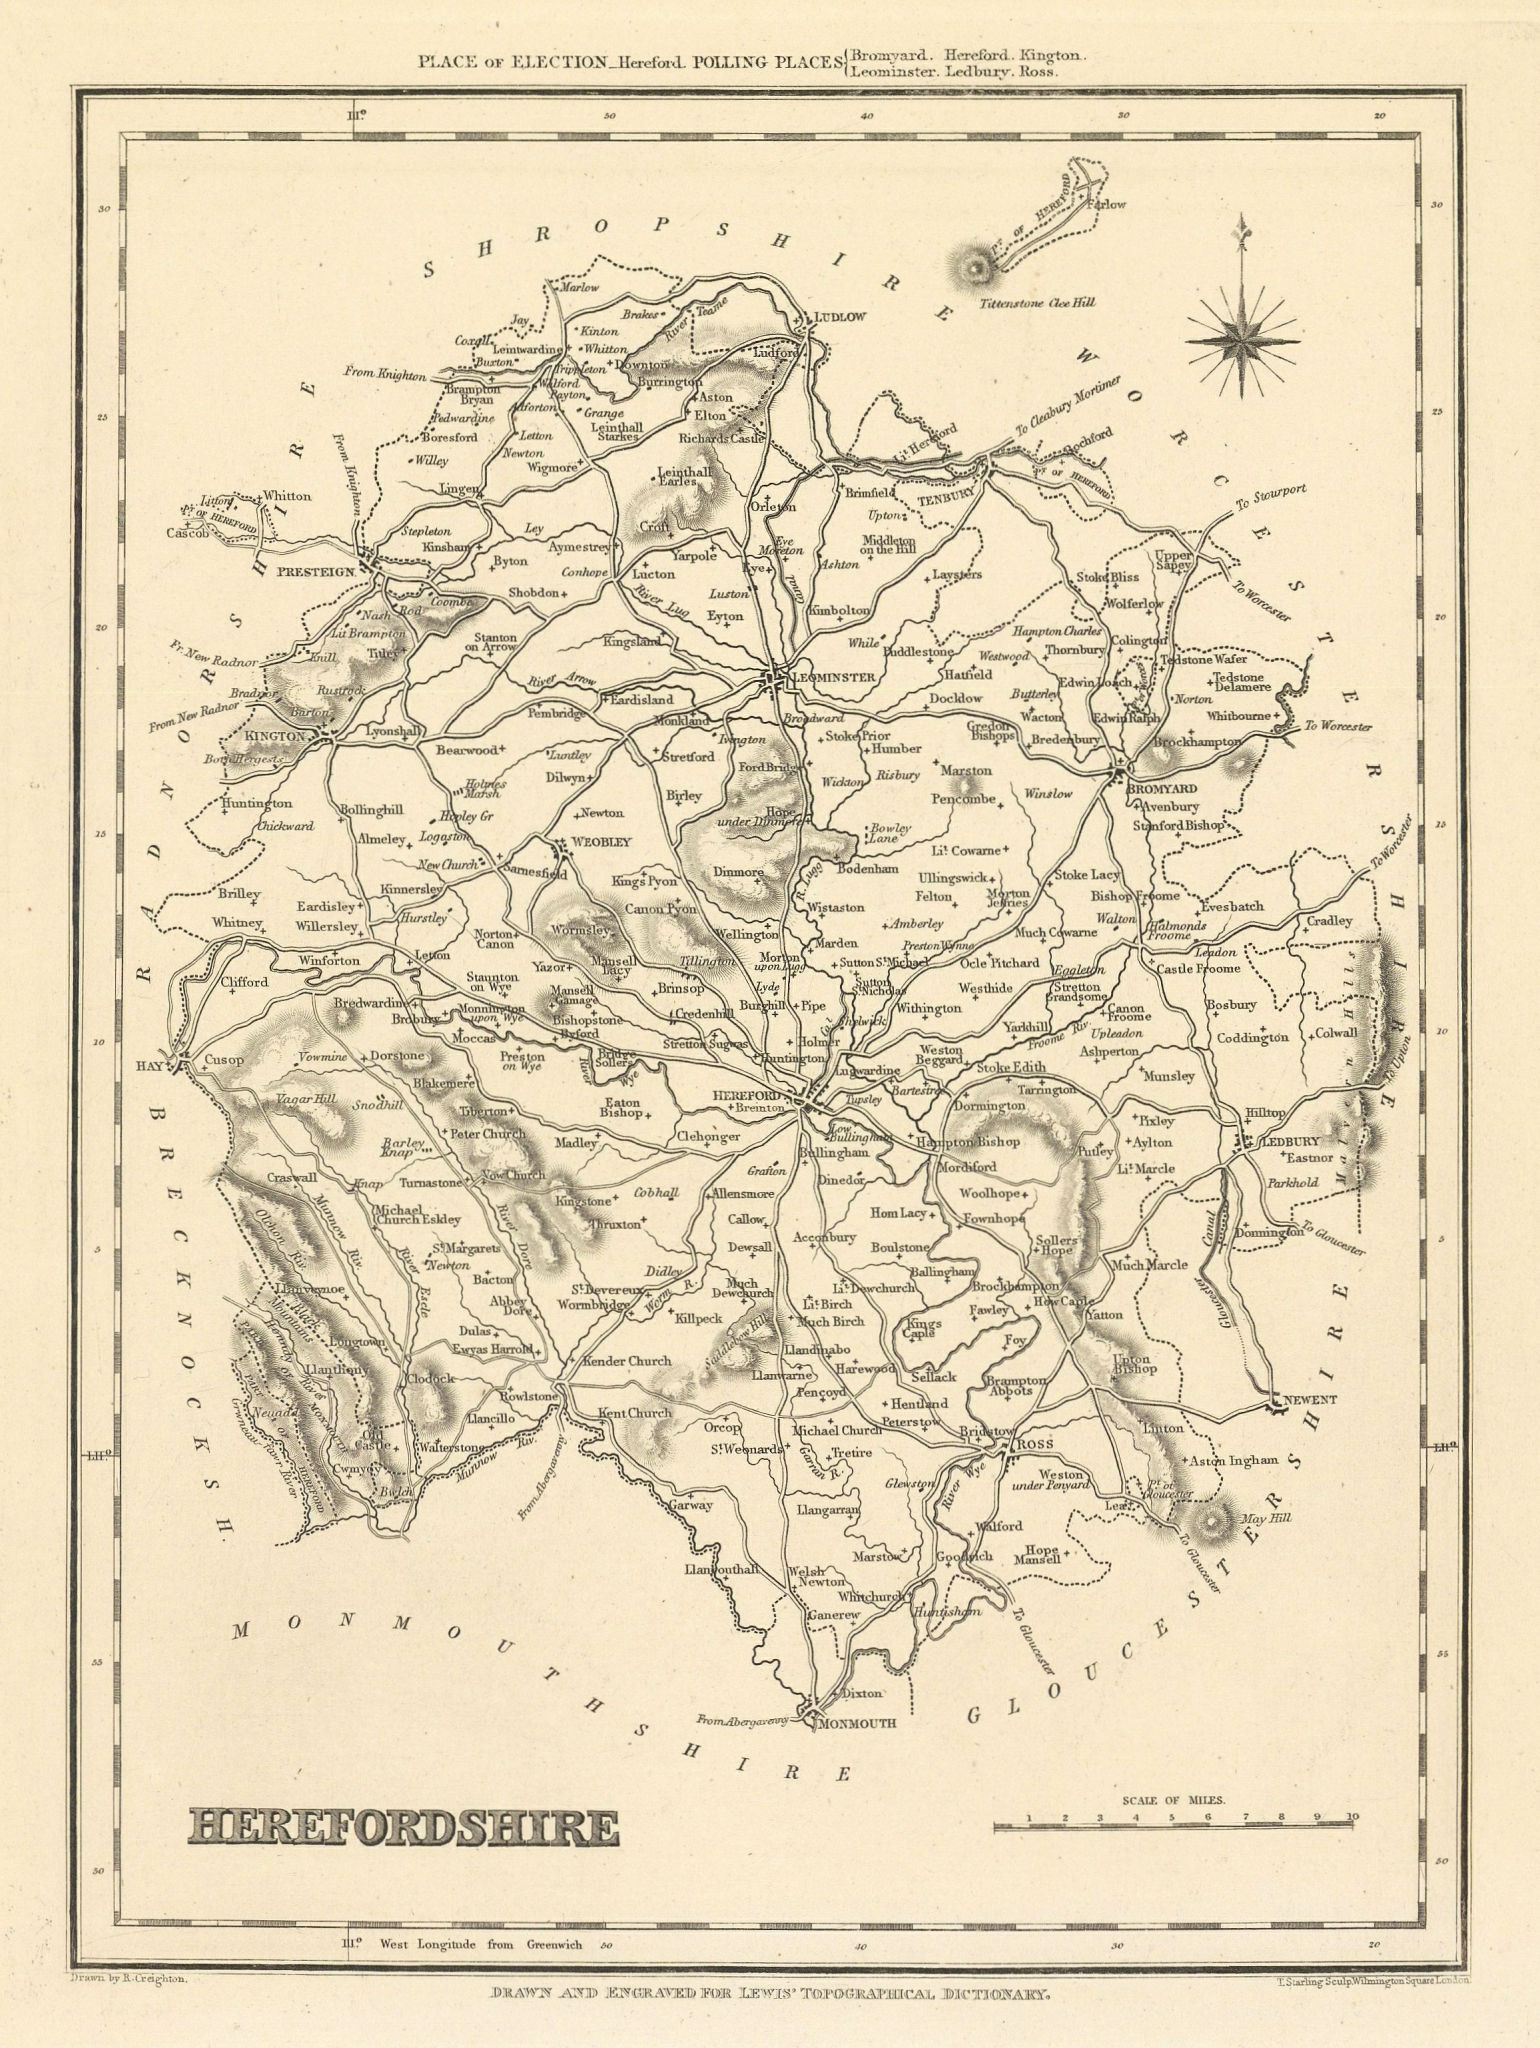 Associate Product Antique county map of HEREFORDSHIRE by Starling & Creighton for Lewis c1840